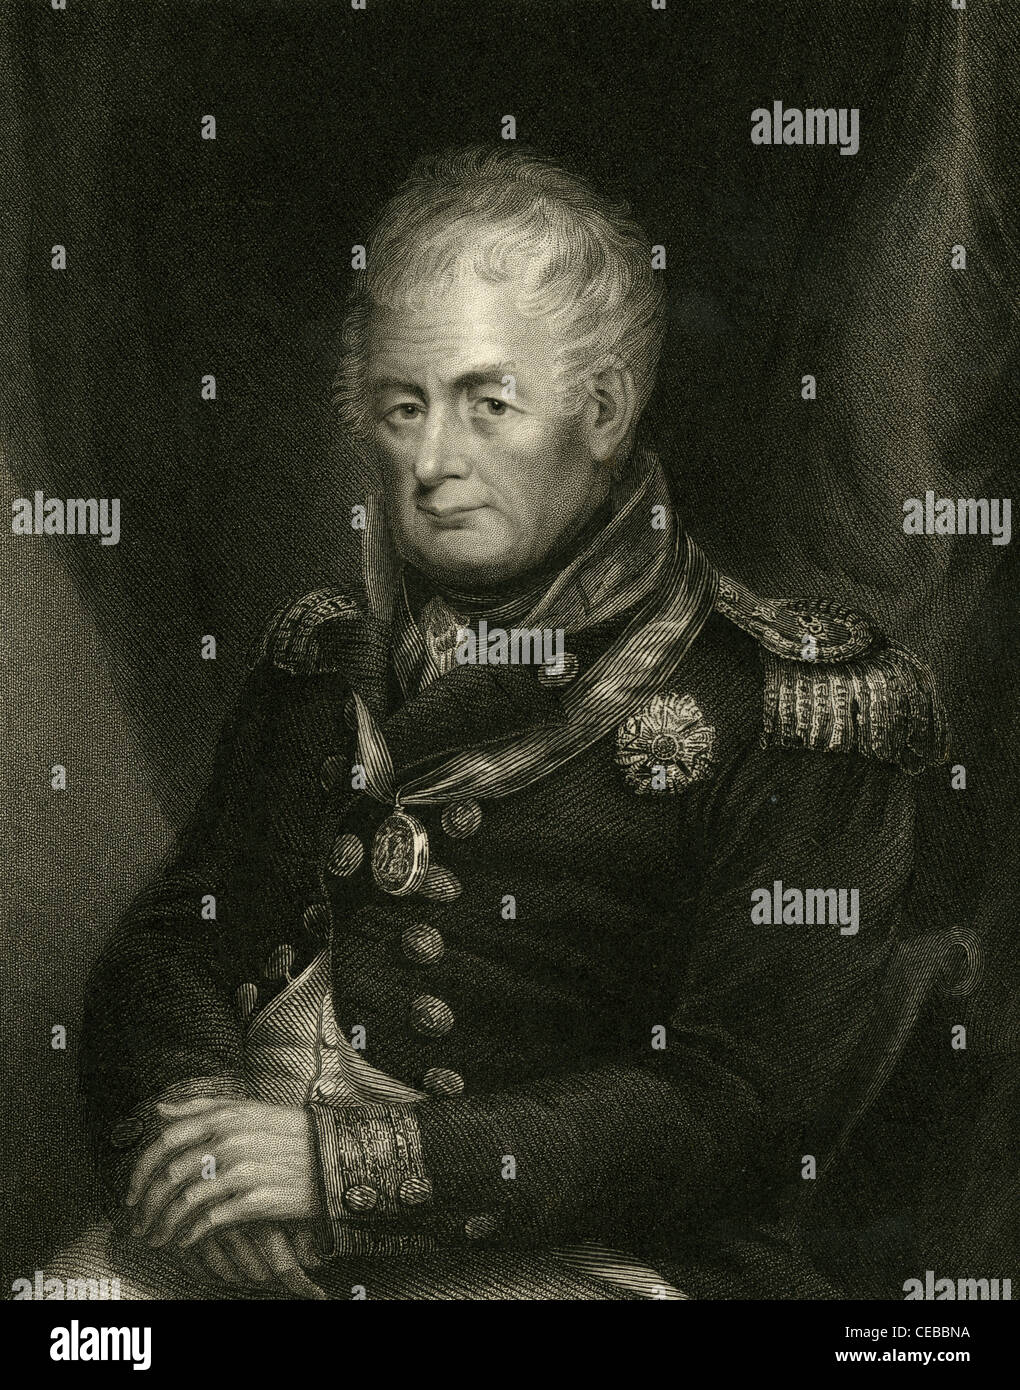 1830 engraving of William Carnegie, 7th Earl of Northesk. Stock Photo